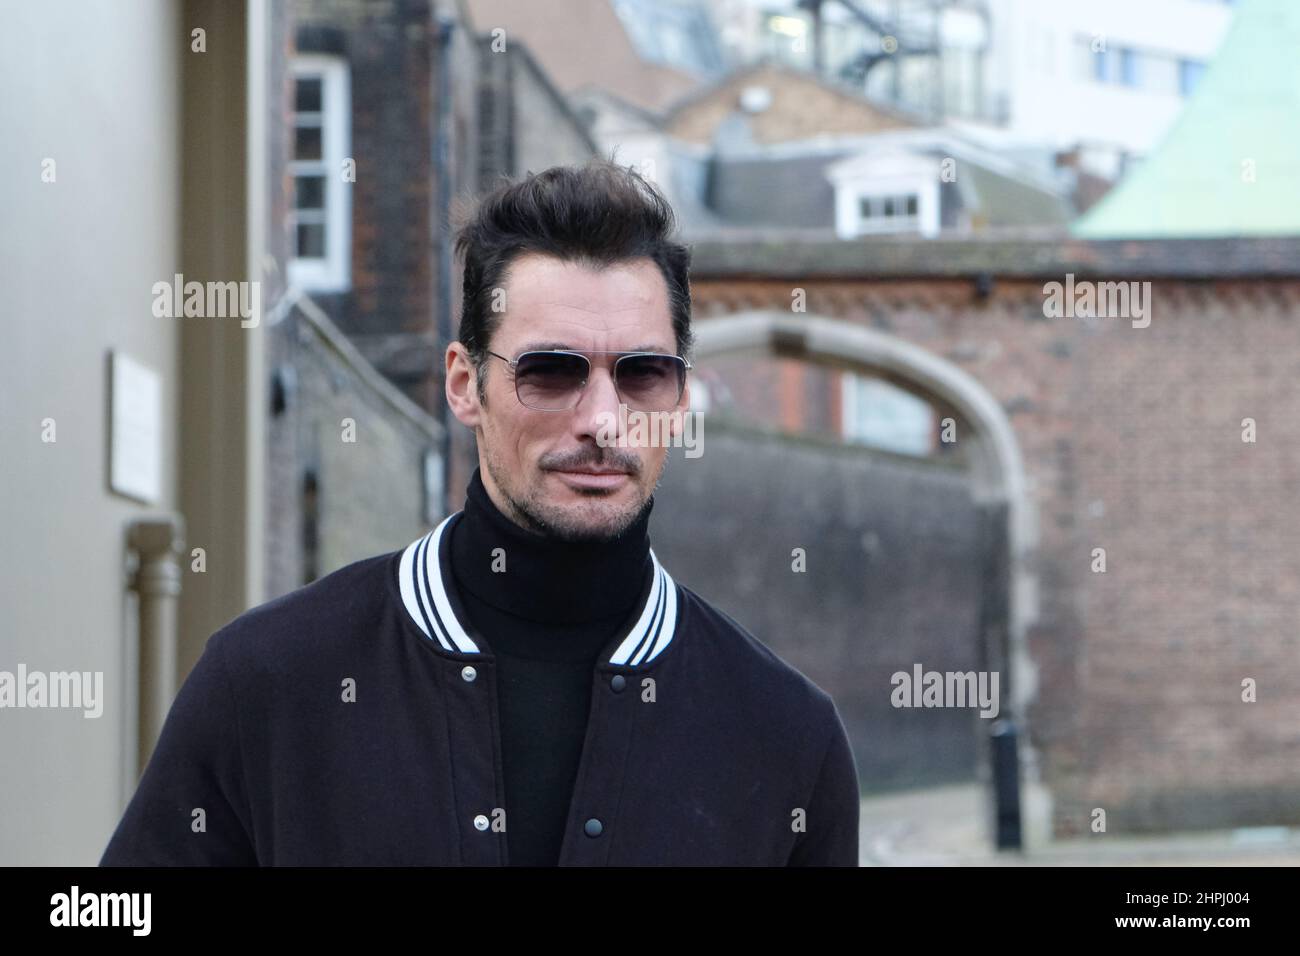 London, UK, 21st Feb, 2022. Model David Gandy poses for photographers outside the Paul & Joe catwalk show venue on day four of London Fashion Week. Credit: Eleventh Hour Photography/Alamy Live News Stock Photo